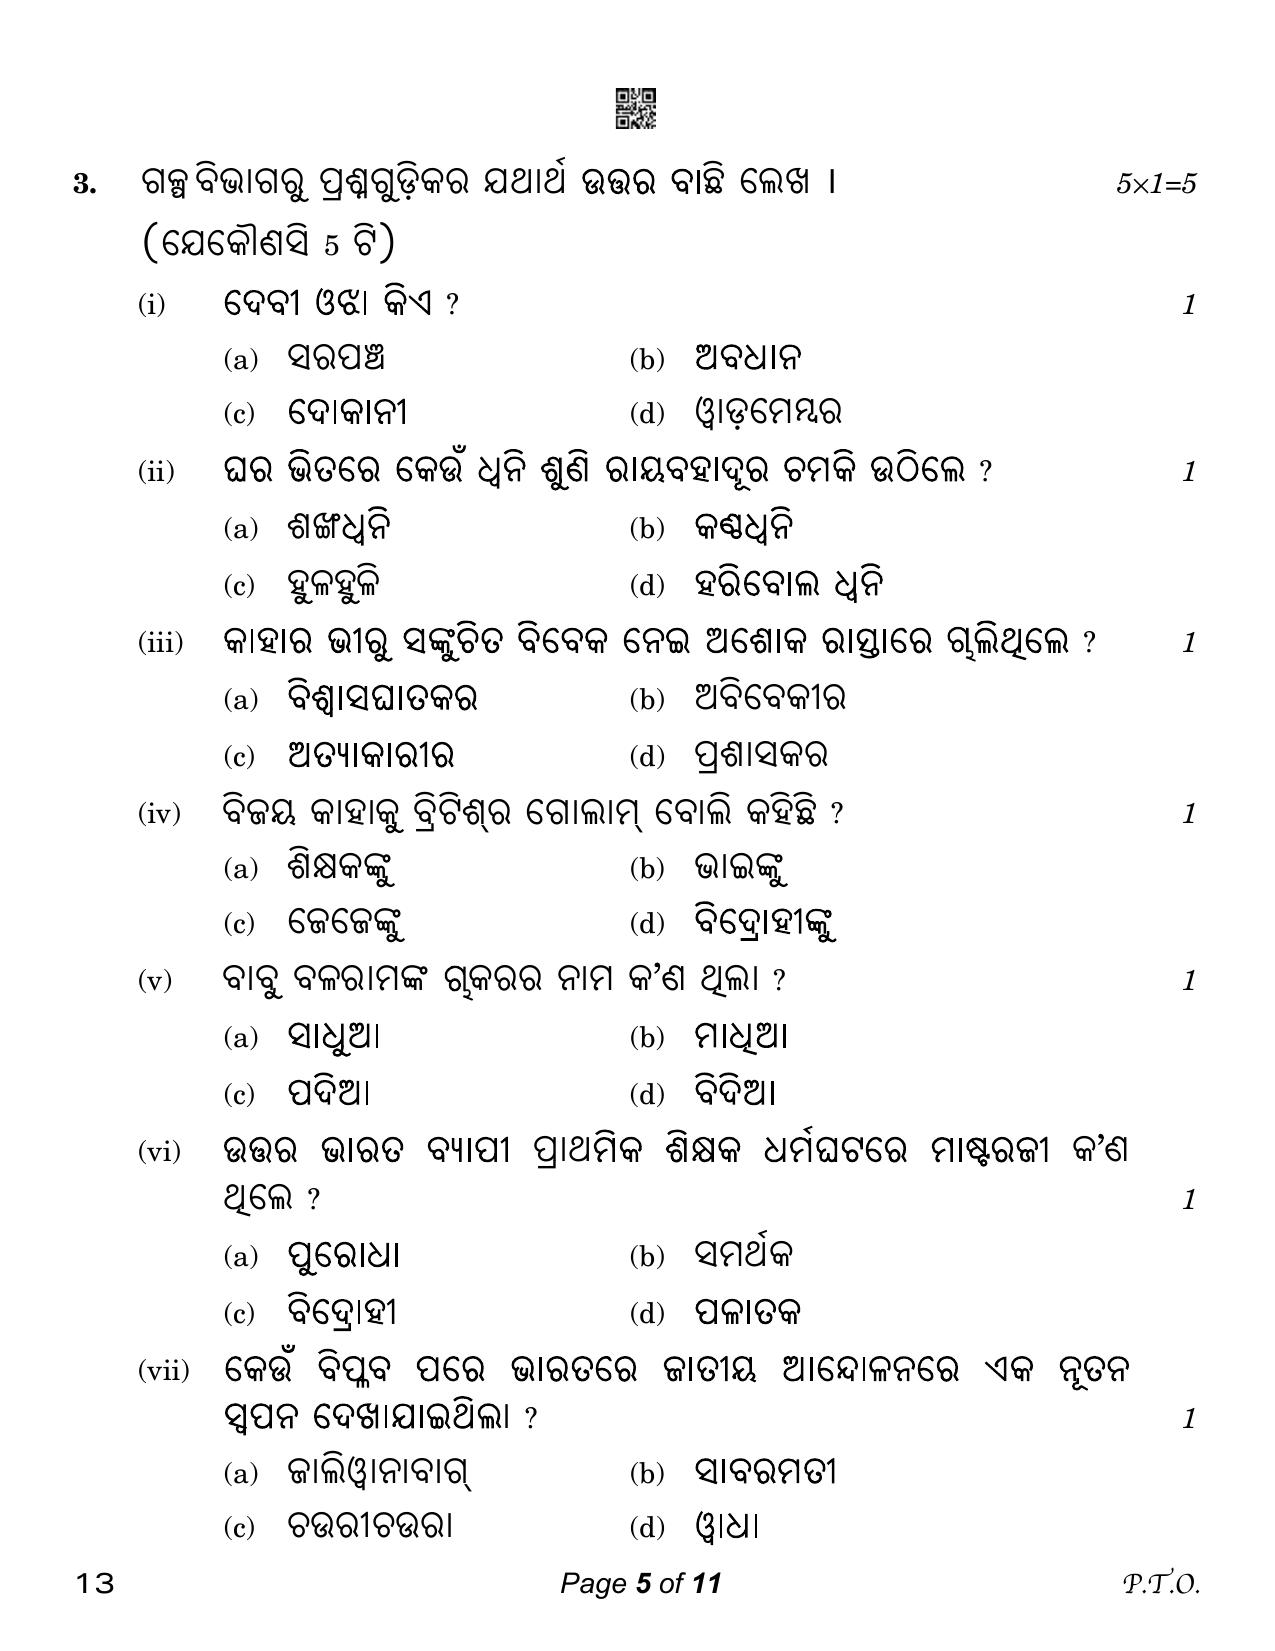 CBSE Class 12 Odia (Compartment) 2023 Question Paper - Page 5